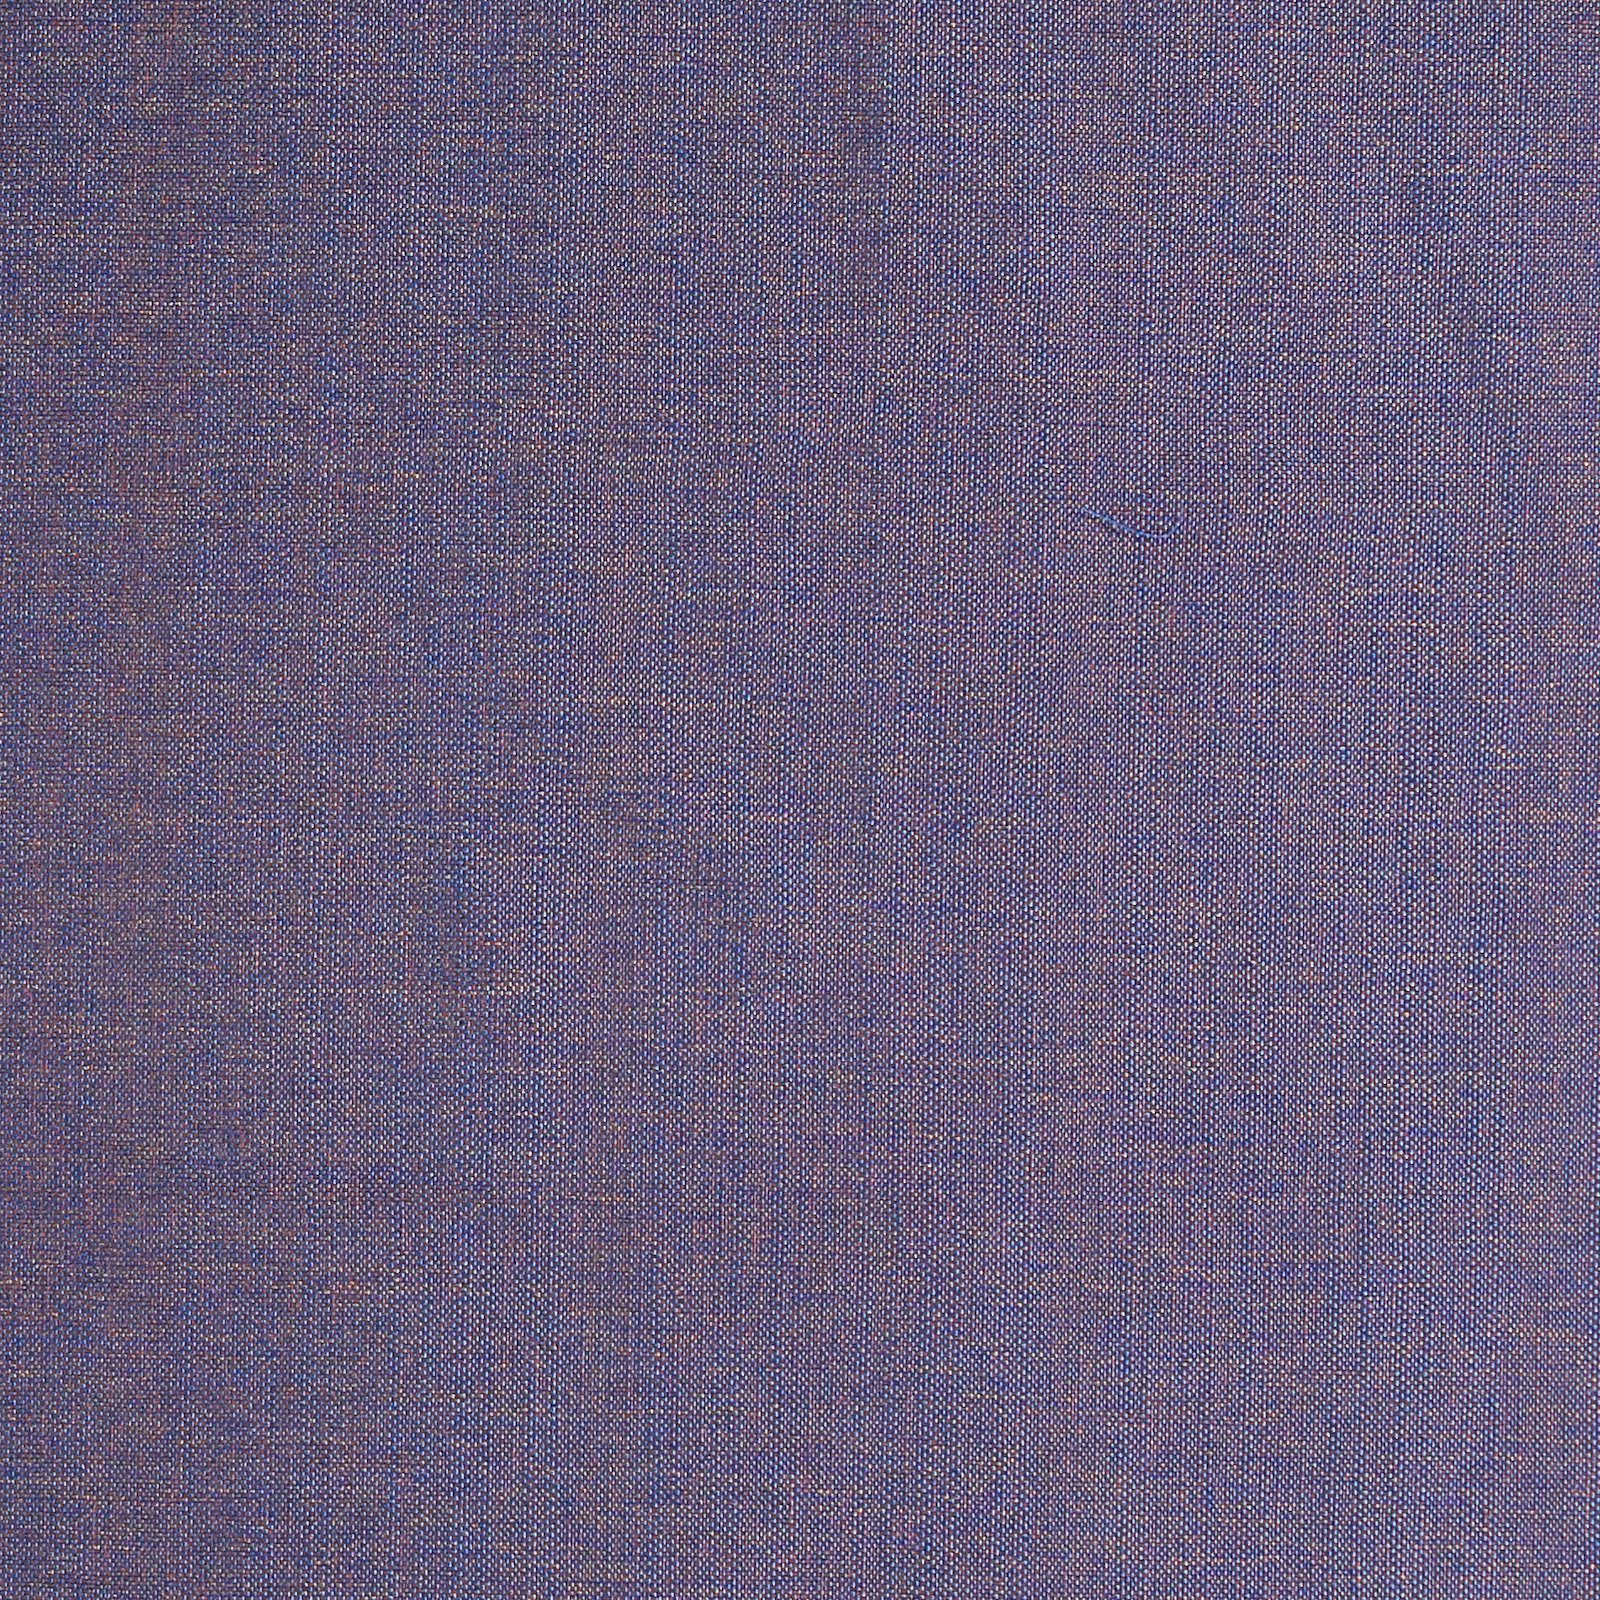 Upholstery fabric cobalt blue/caramel 824156_pack_solid